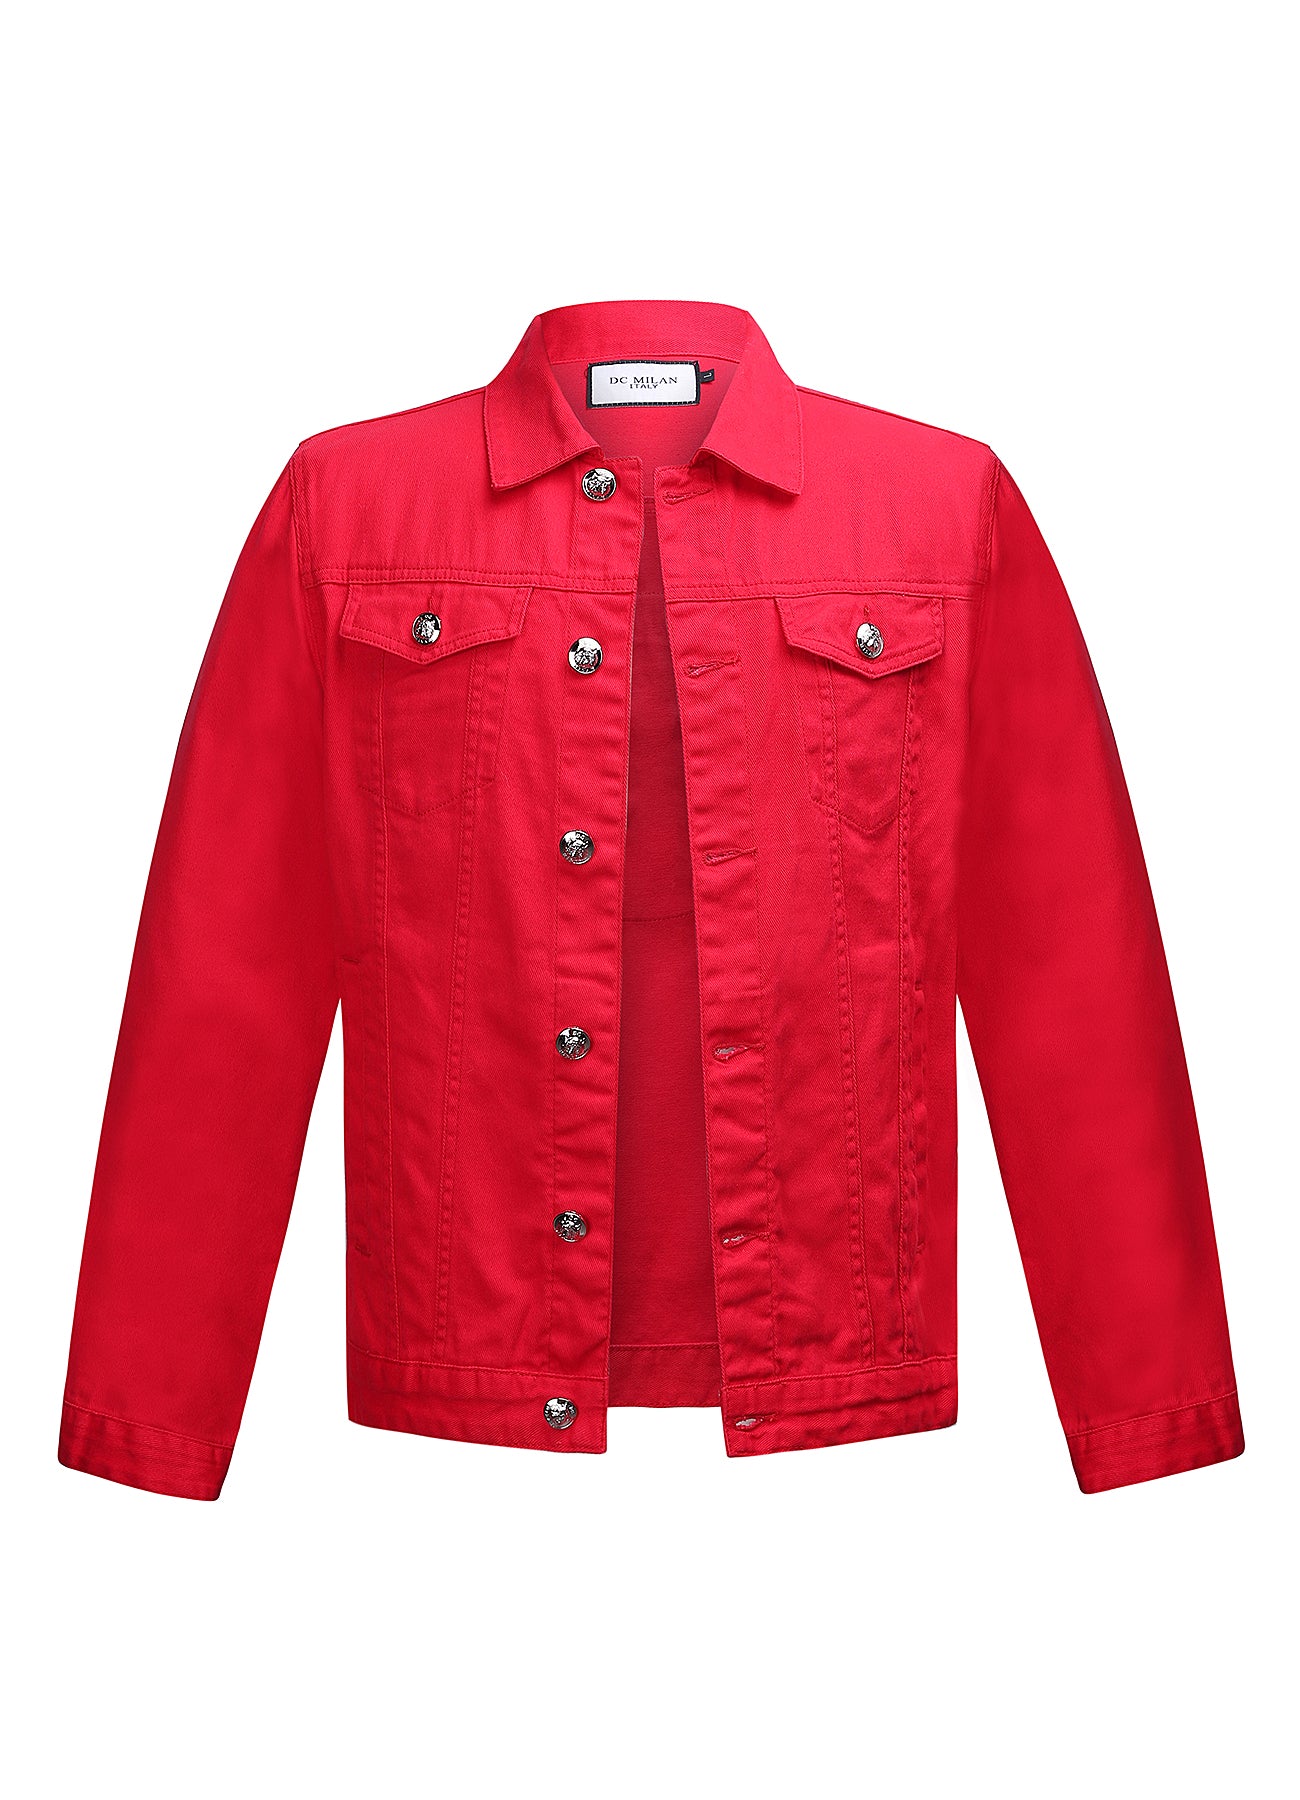 Embroidered Red Denim Jacket Classic